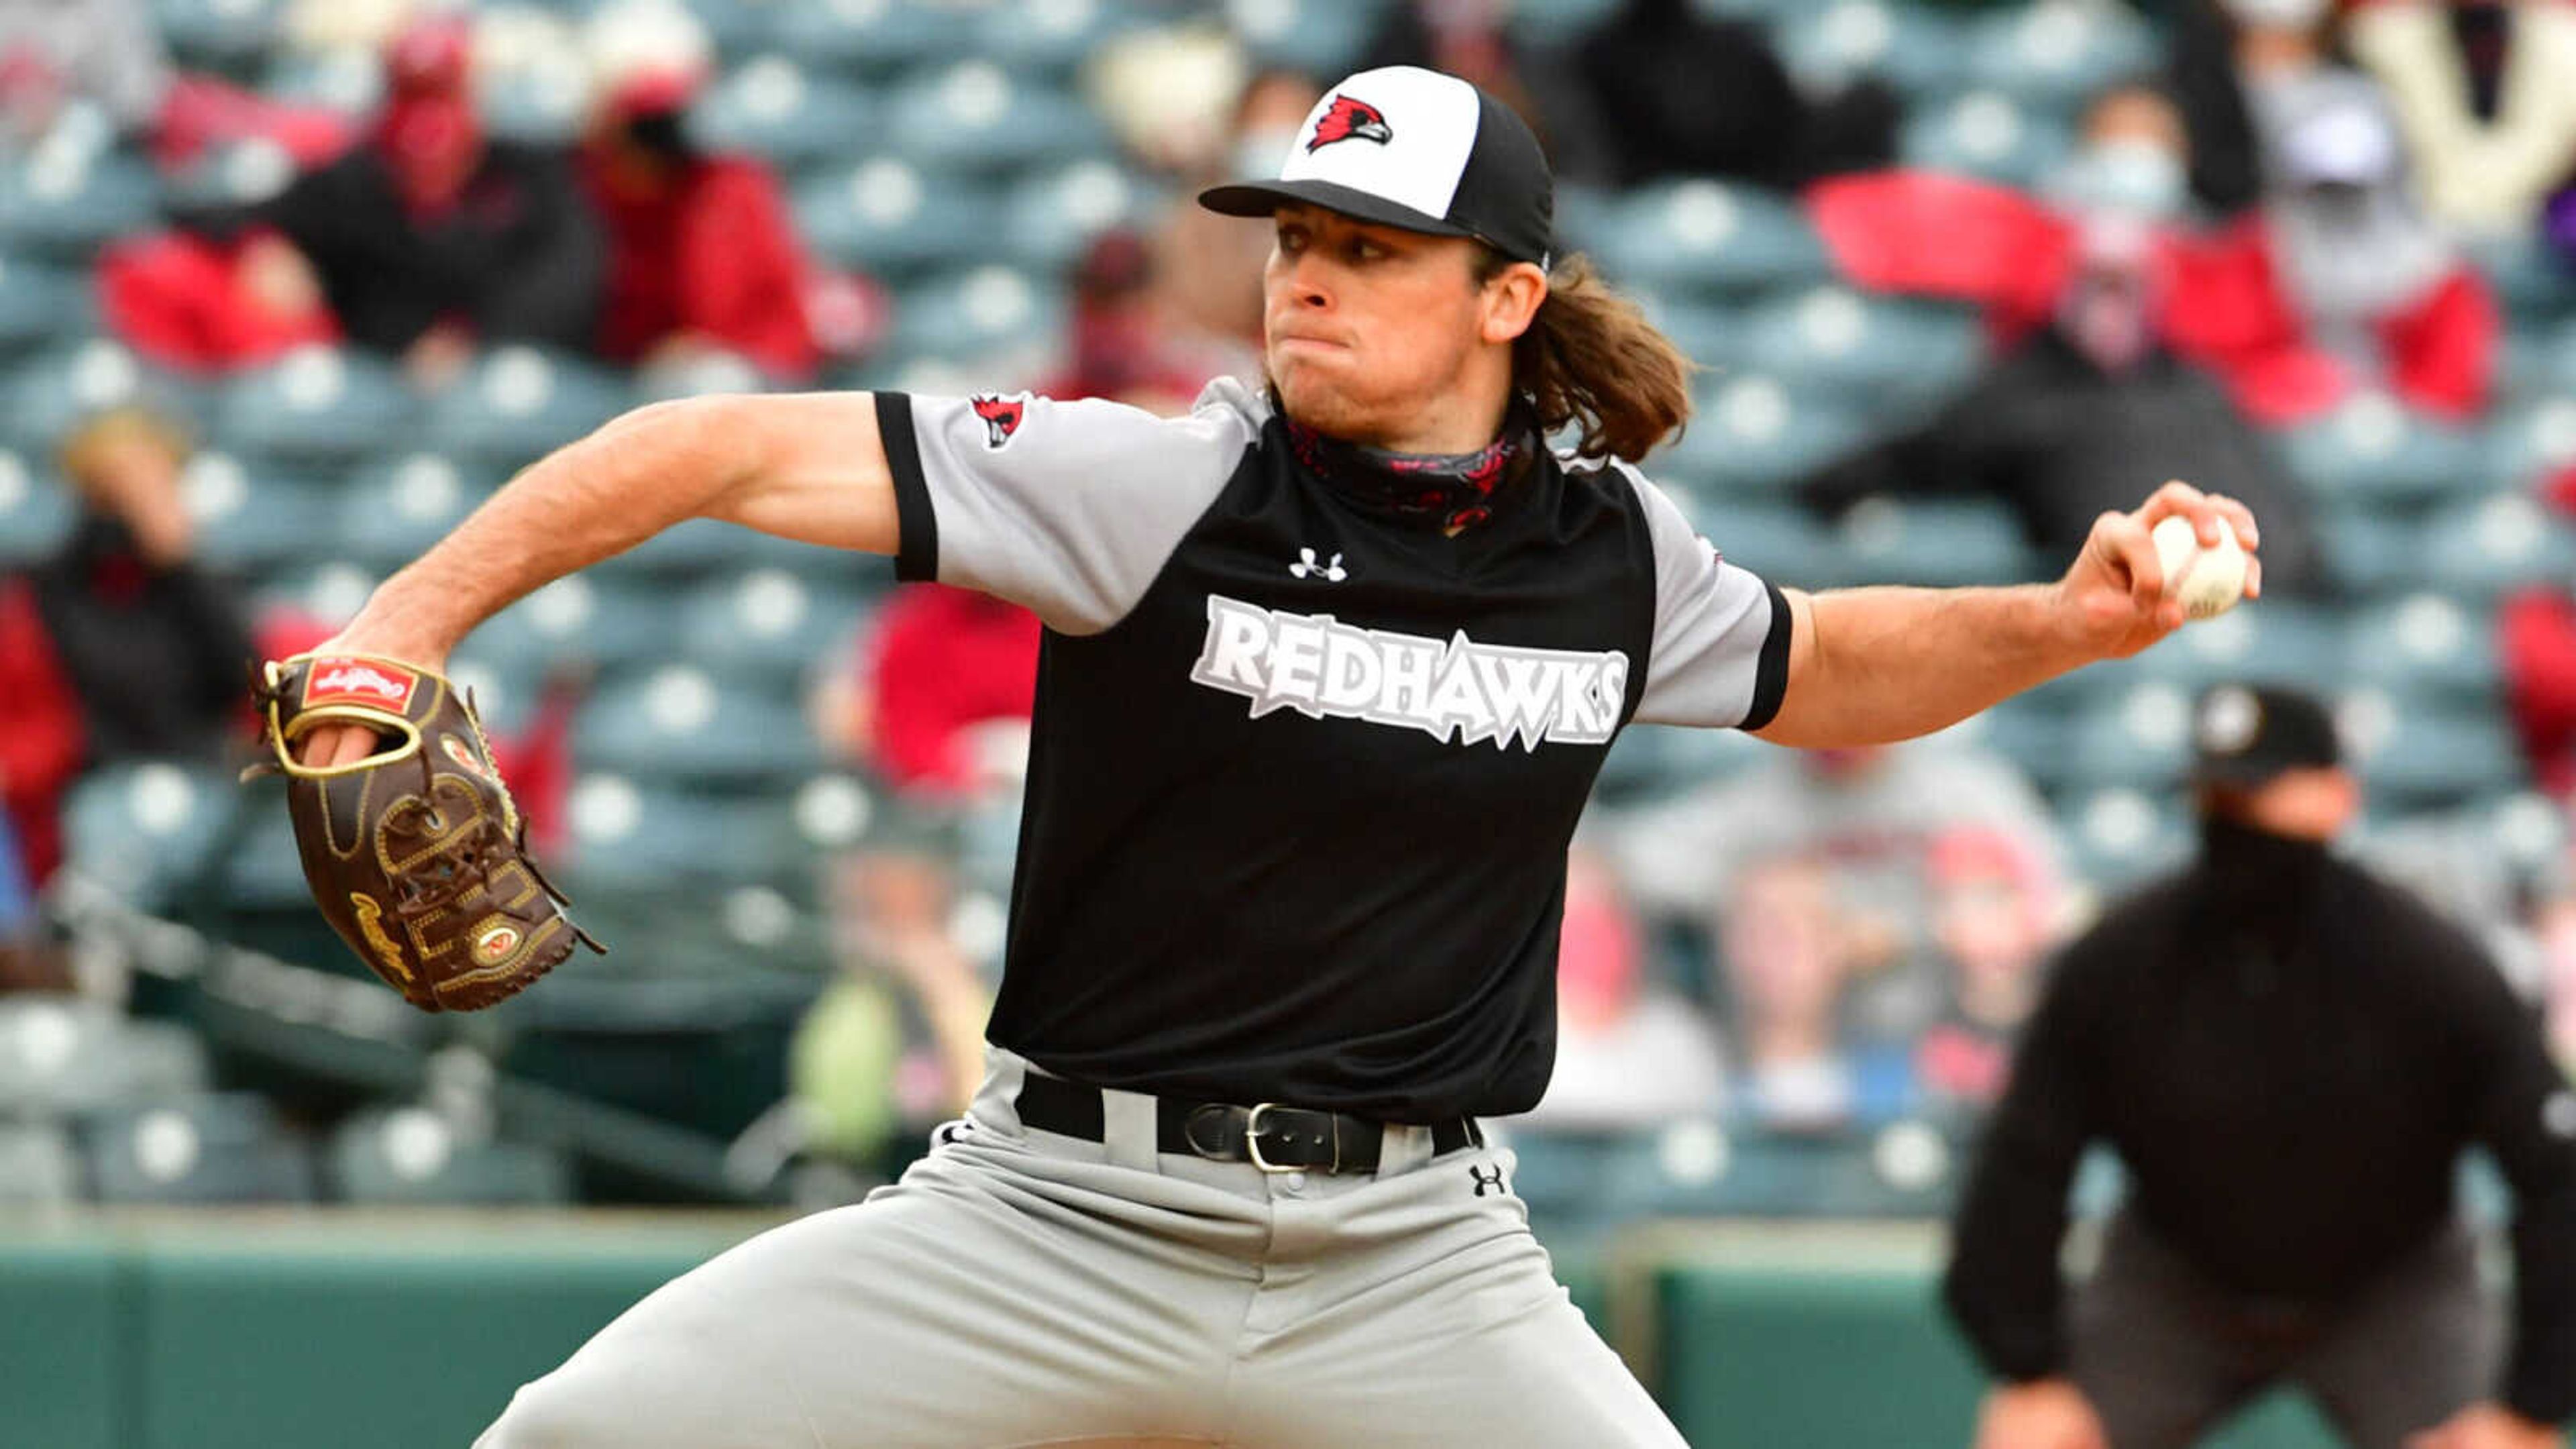 Dylan Dodd (#25) pitches for the Southeast Missouri State Redhawks. Dodd was drafted in 2021 by the Atlanta Braves and had his major league debut earlier this month.